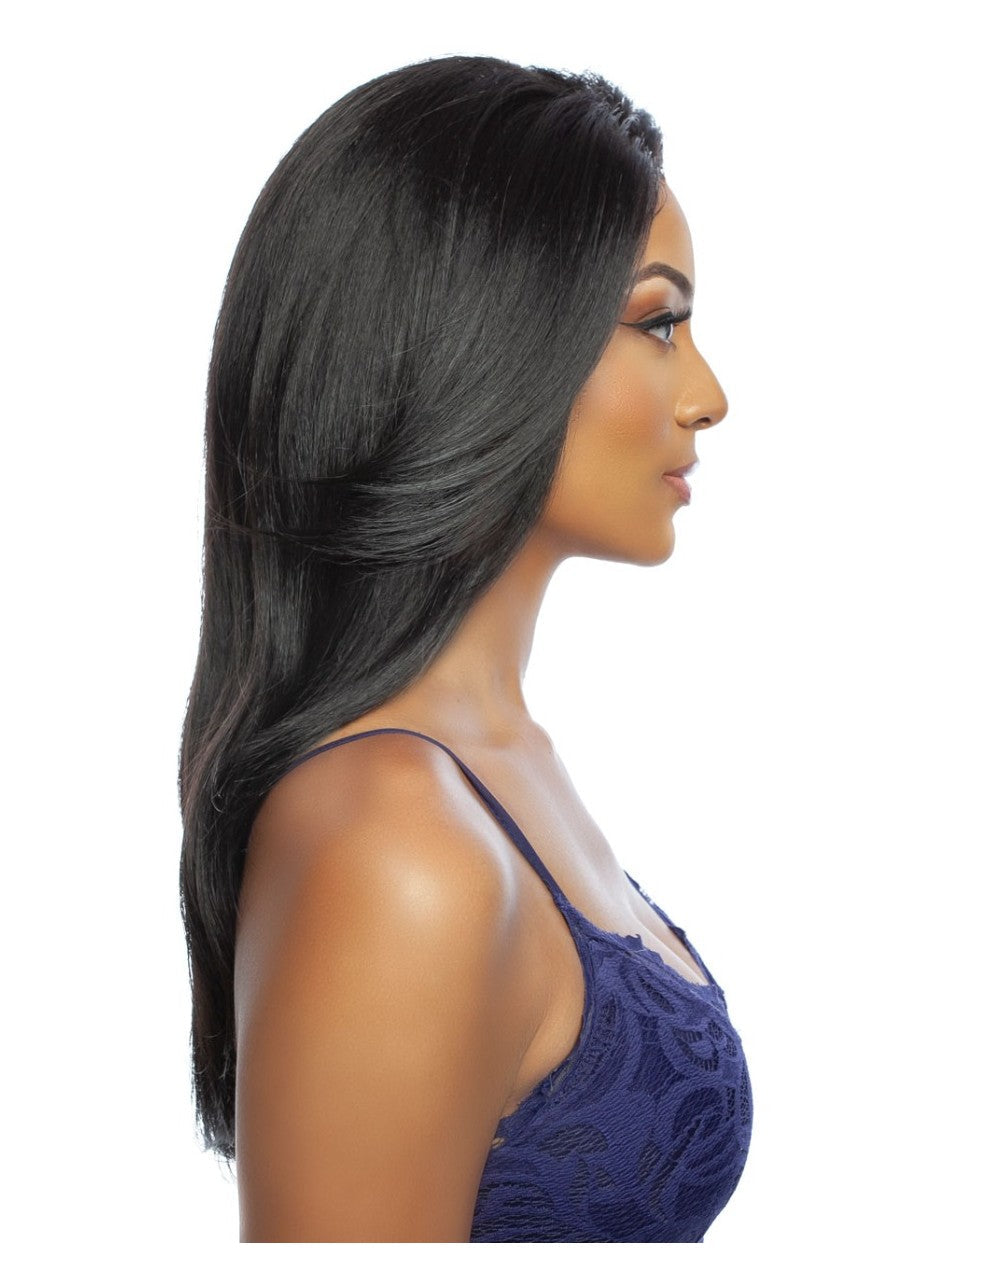 Mane Concept Red Carpet HD Whole Lace Front Wig Mane Beauty 01 Straight 20 RCHD401 - Elevate Styles